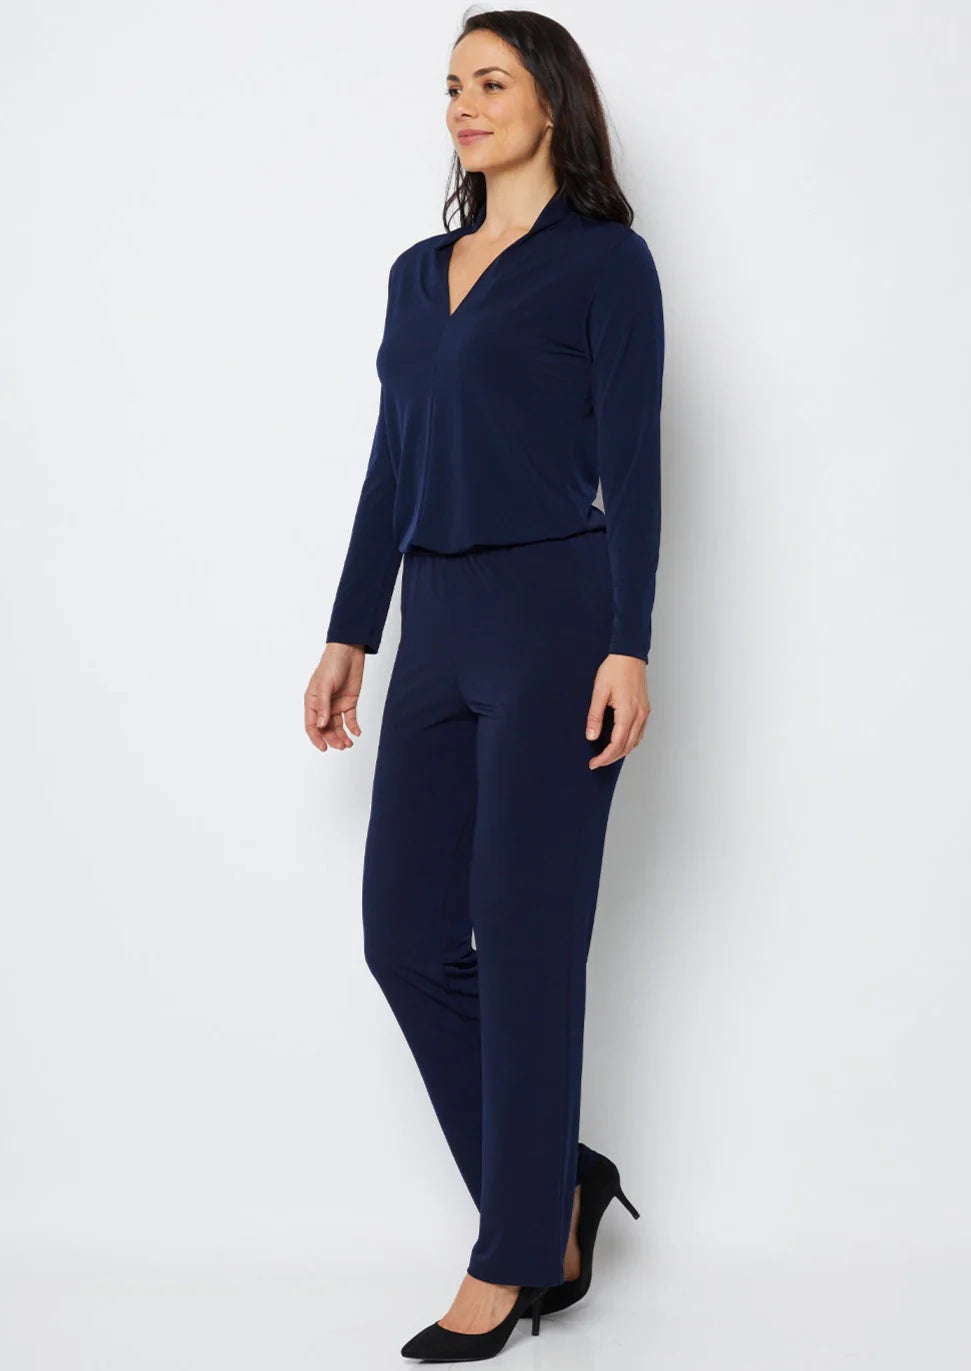 Philosophy Linear Pant - Navy